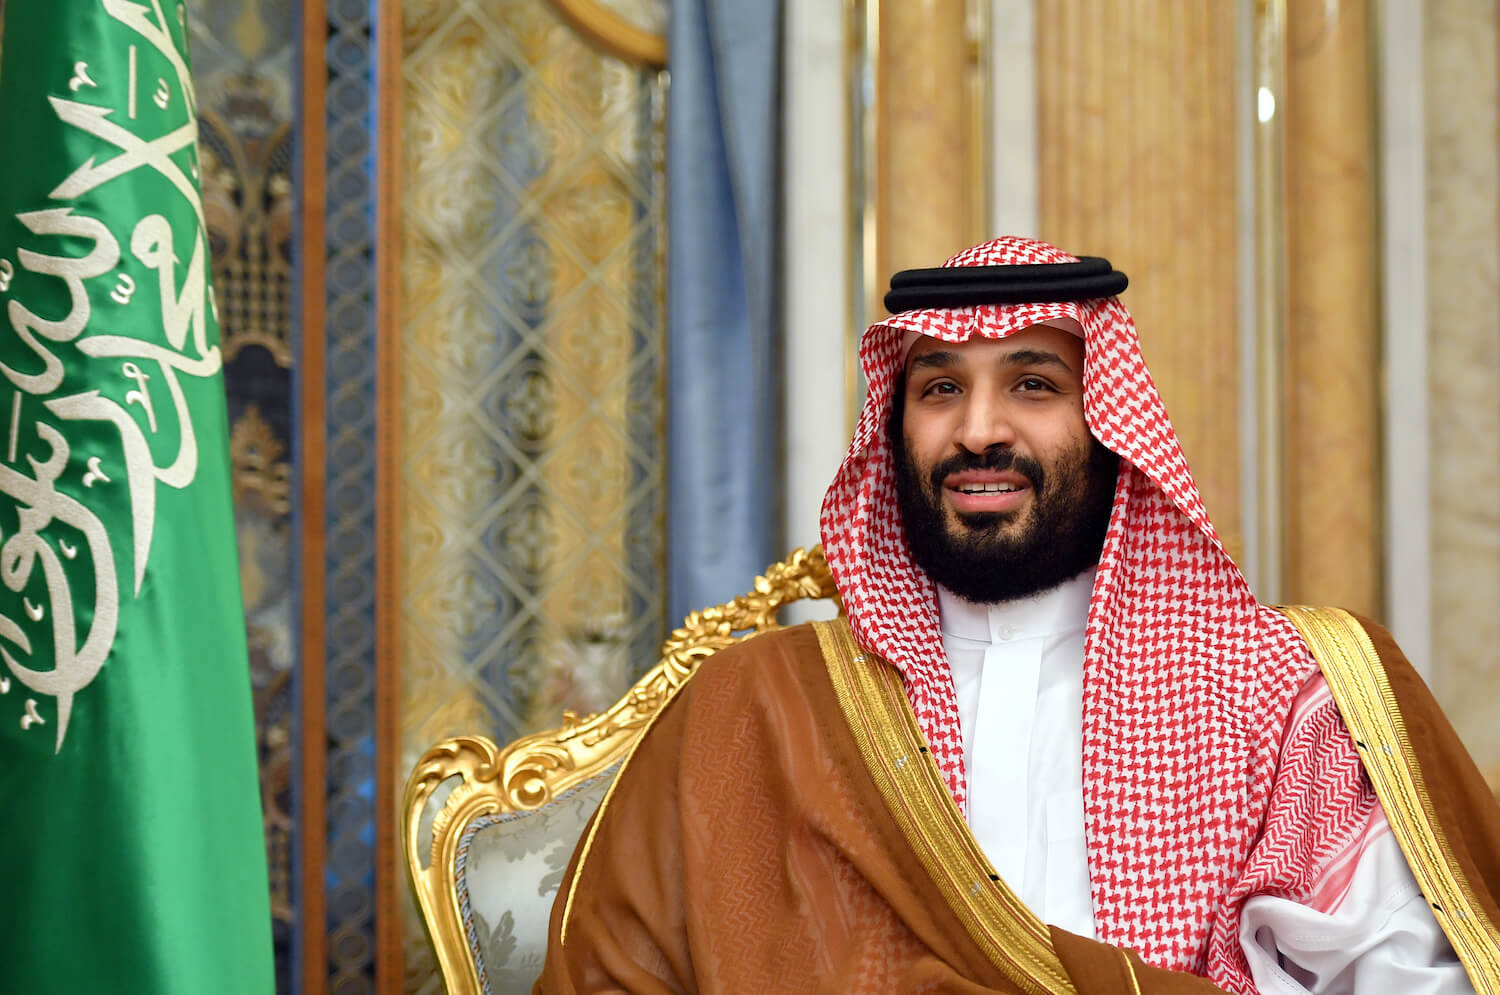 Saudi's MBS Shocks World, 'Purges' More Dissenters and Sends Global Oil Prices Crashing